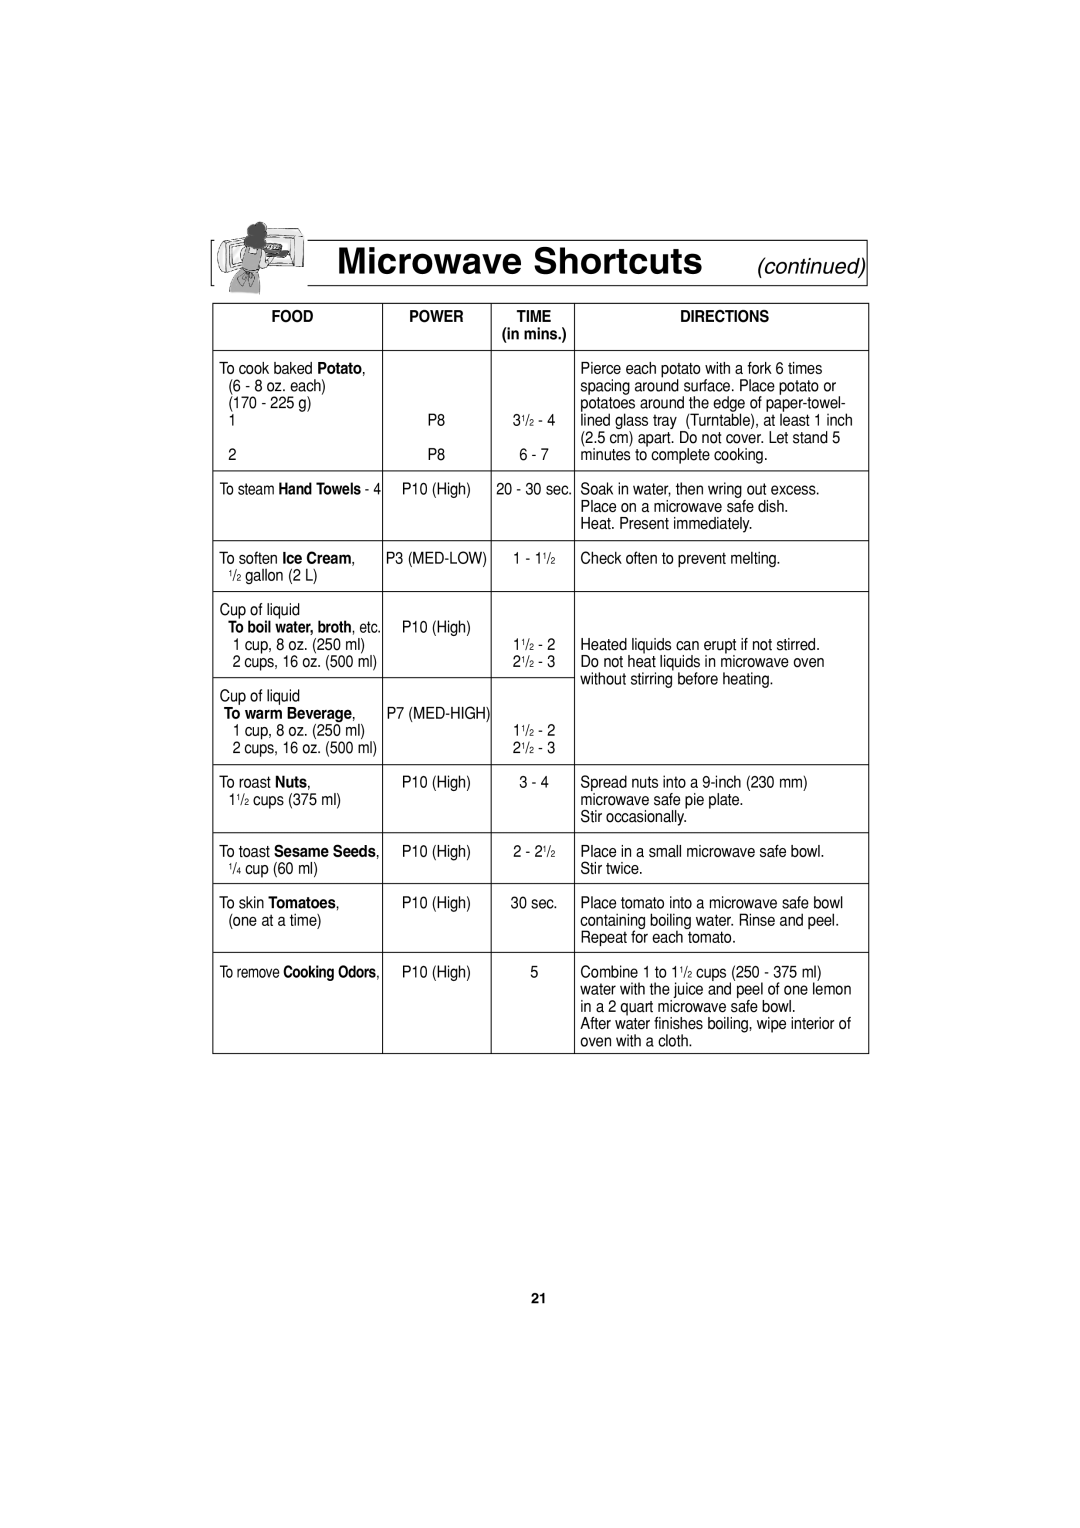 Panasonic NN-T993, NN-T793 operating instructions Microwave Shortcuts, continued, Food, Directions, To warm Beverage 